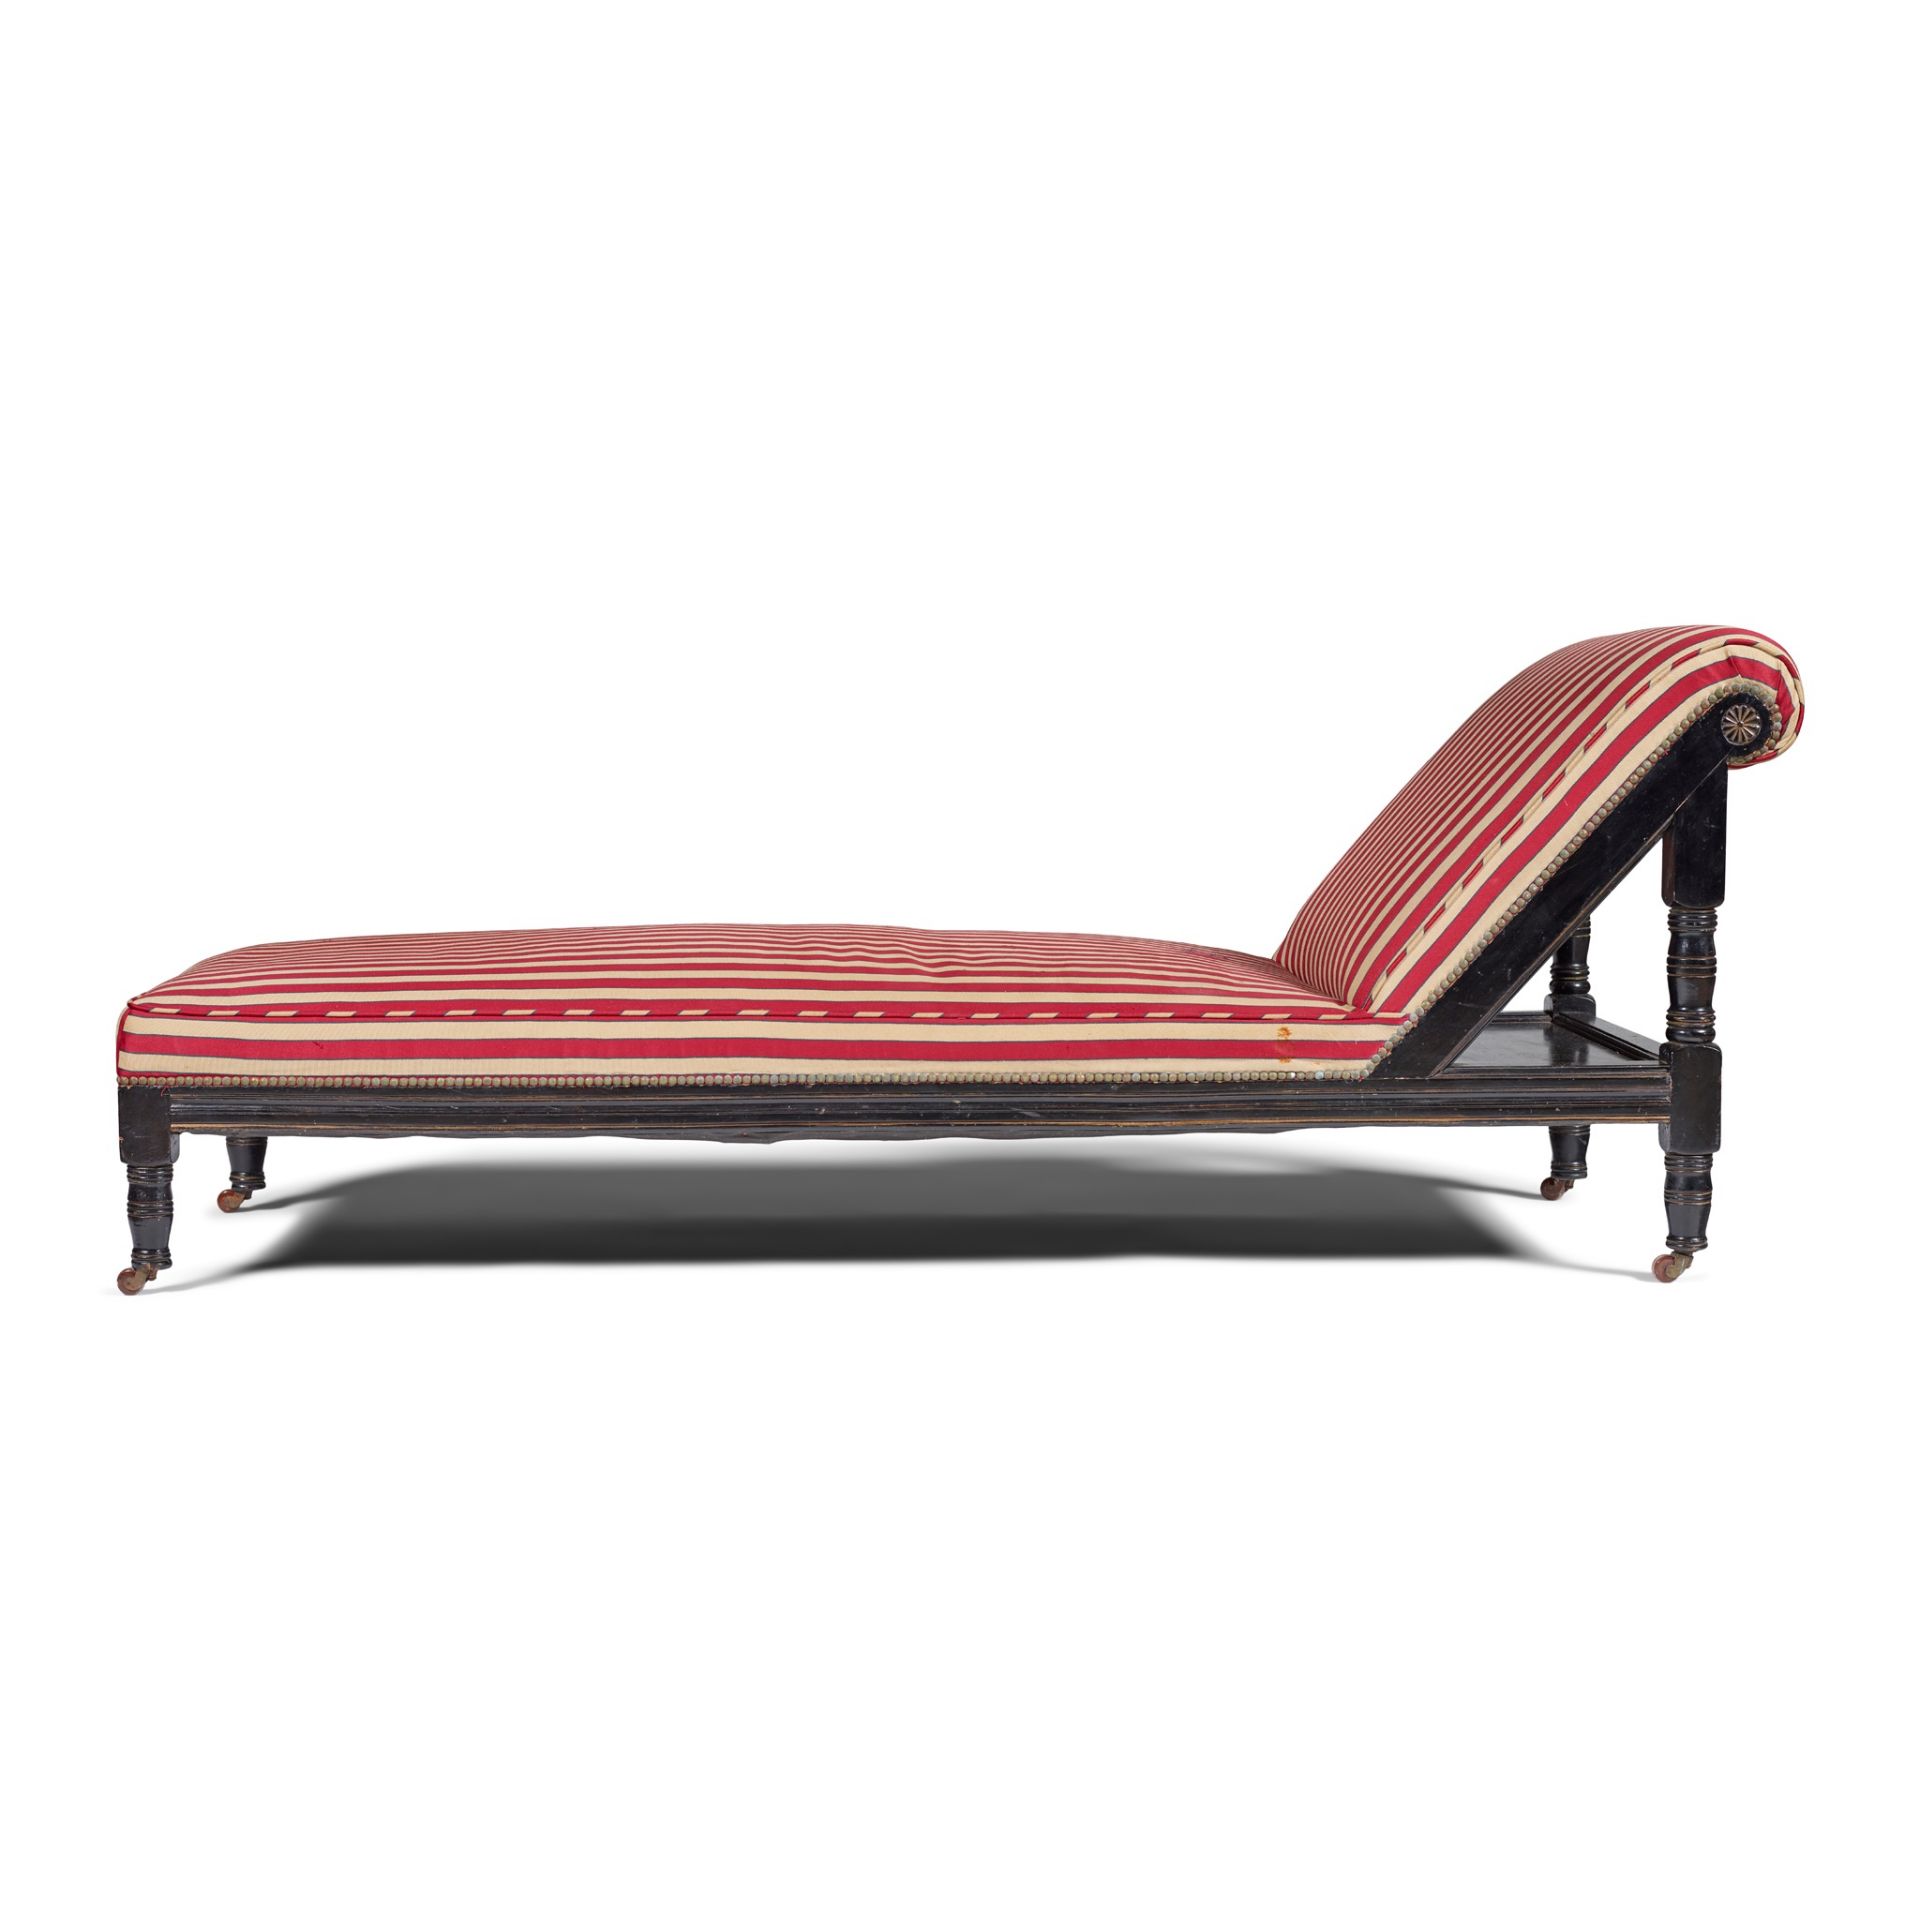 COLLINSON & LOCK, LONDON (ATTRIBUTED MAKER) AESTHETIC MOVEMENT CHAISE LONGUE, CIRCA 1870 - Image 3 of 3